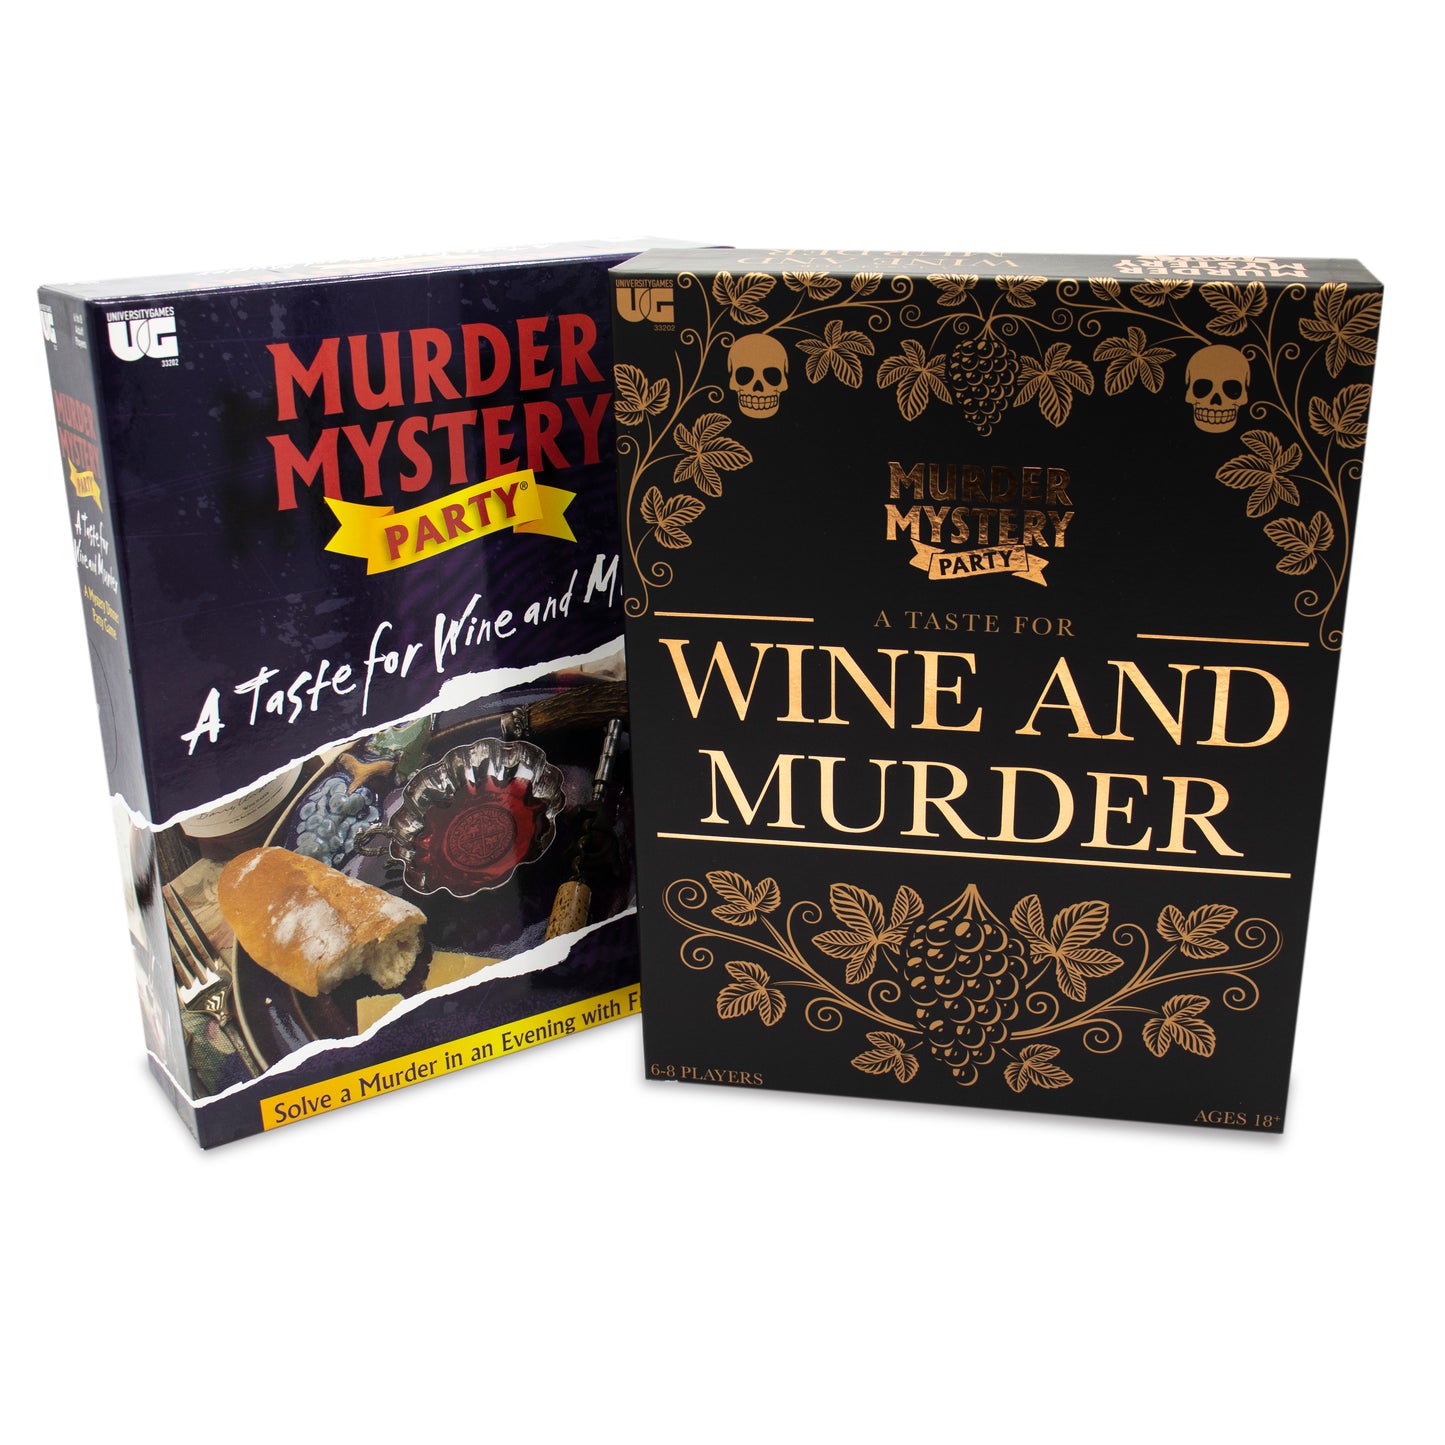 A Taste for Wine and Murder.